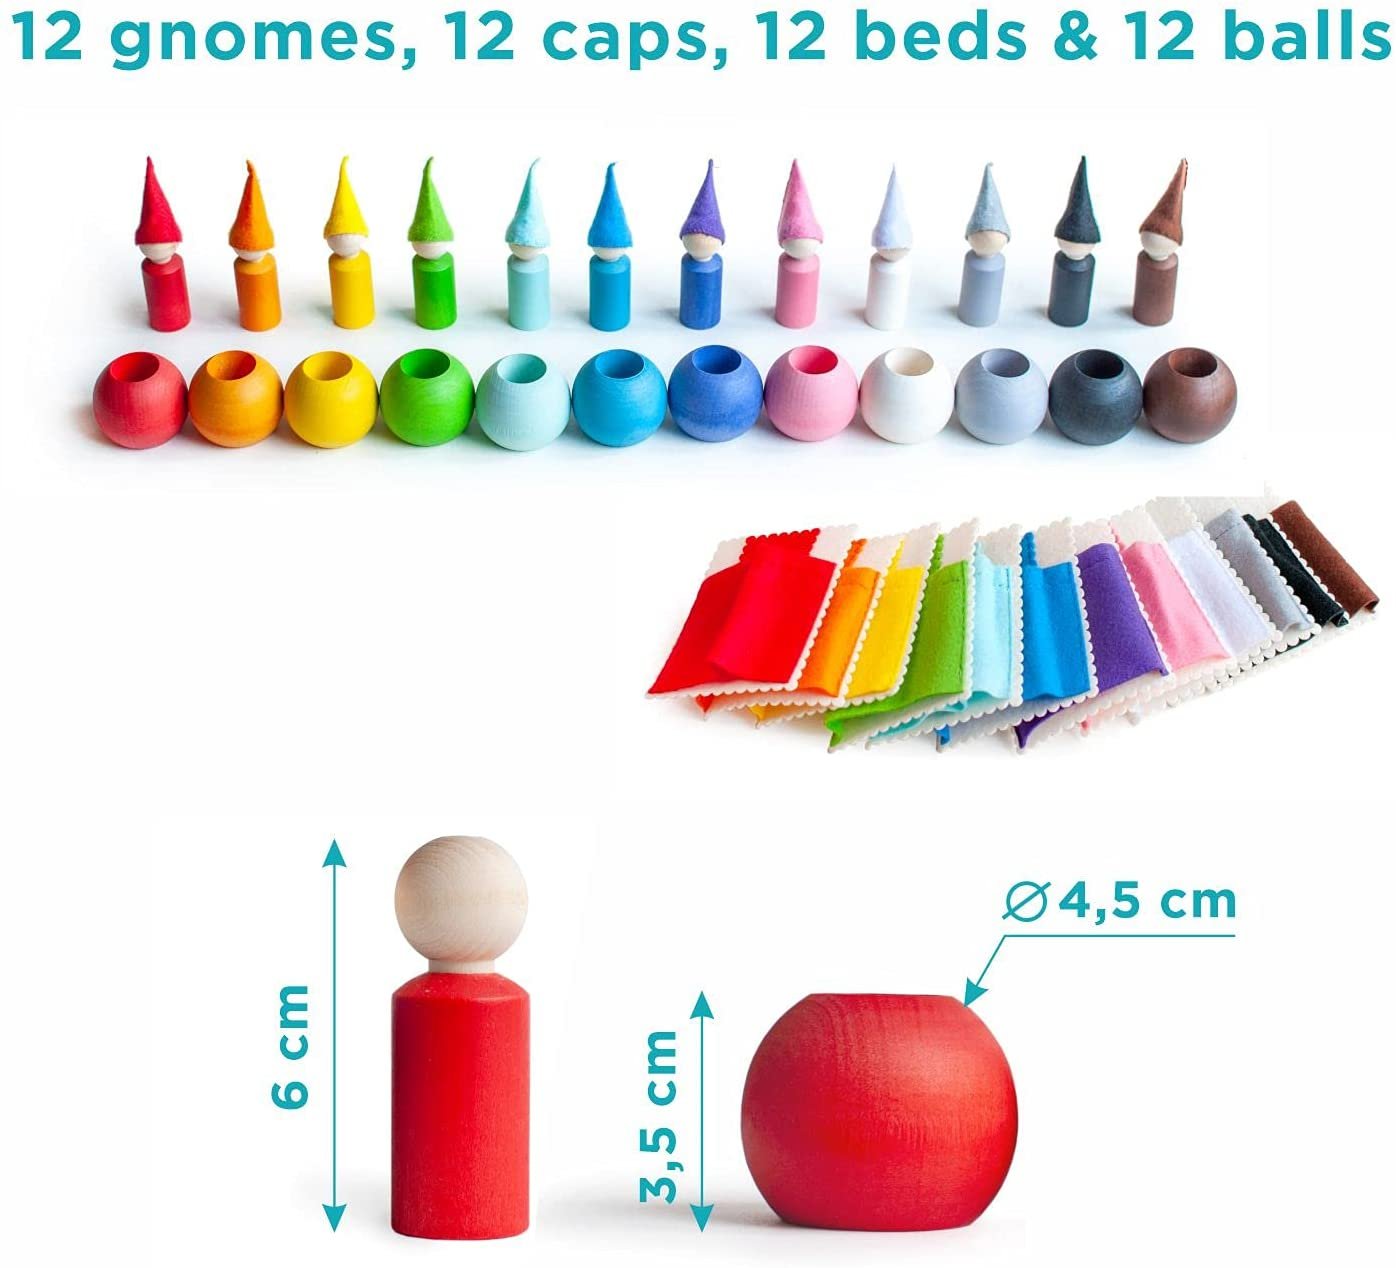 Ulanik Peg Dolls in Balls with Hats & Beds Toddler Montessori Toys for 3+ Wooden Waldorf Dolls for Learning Color Sorting & Counting